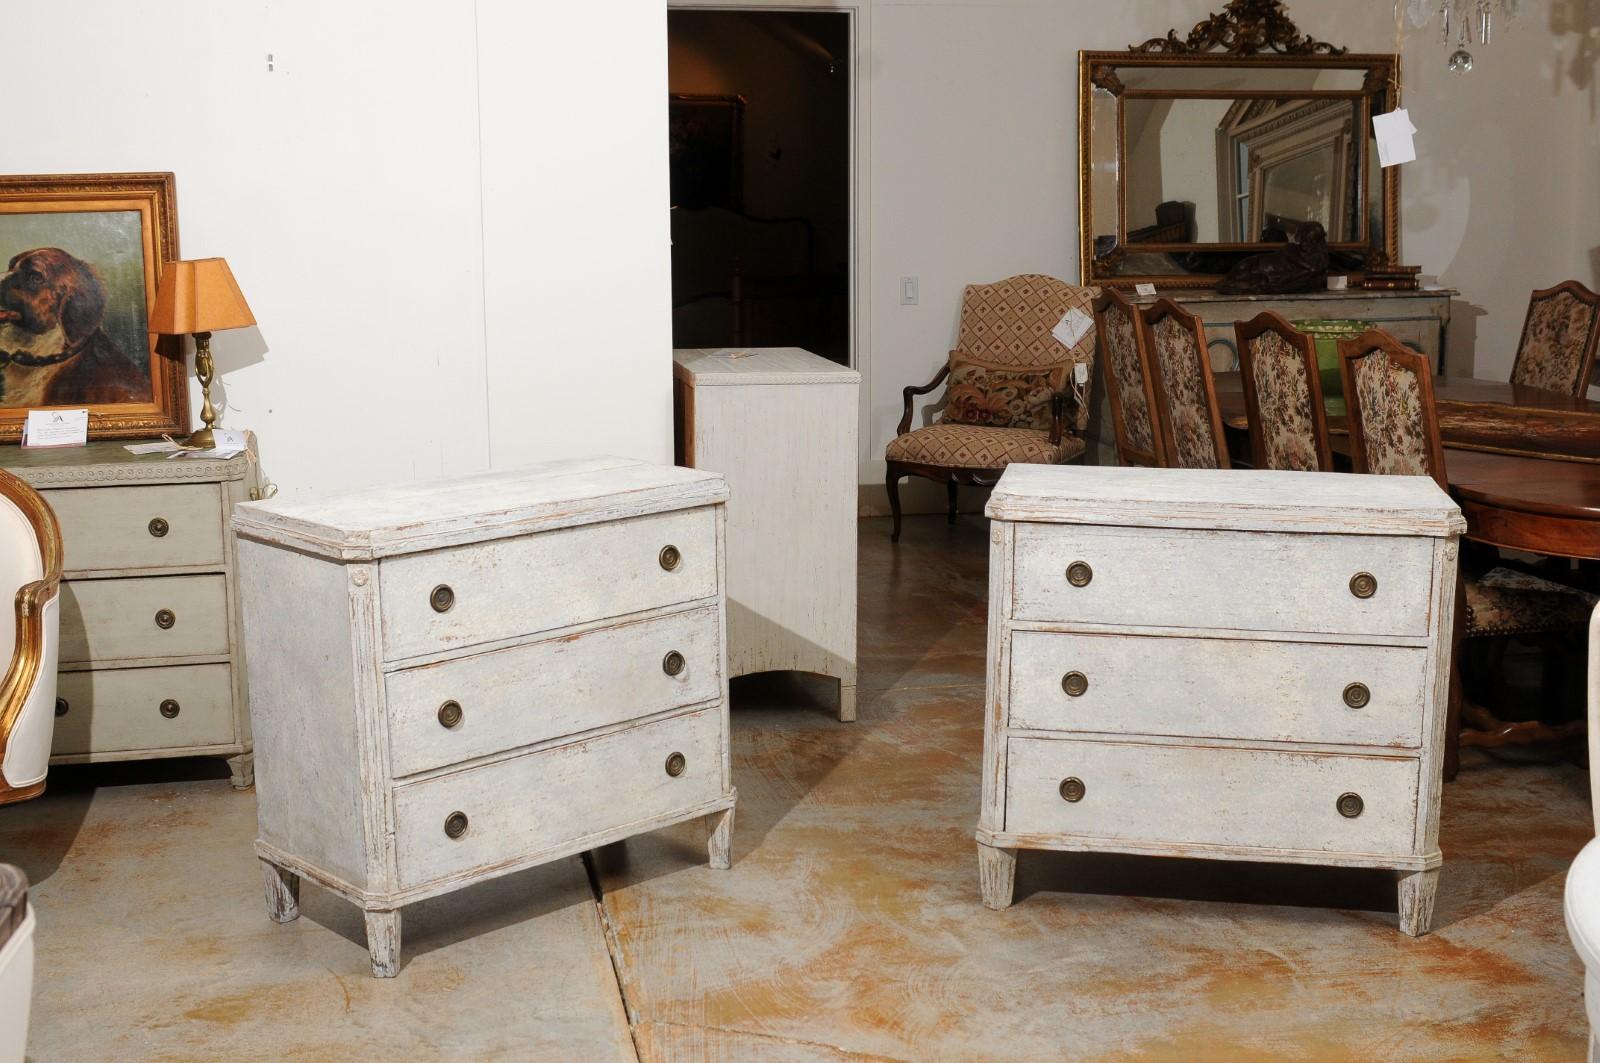 A pair of Swedish Gustavian style painted wood chests from the 19th century, with three drawers and fluted side posts. Created in Sweden during the 19th century, each of this pair of chests features a rectangular raised top with canted corners in